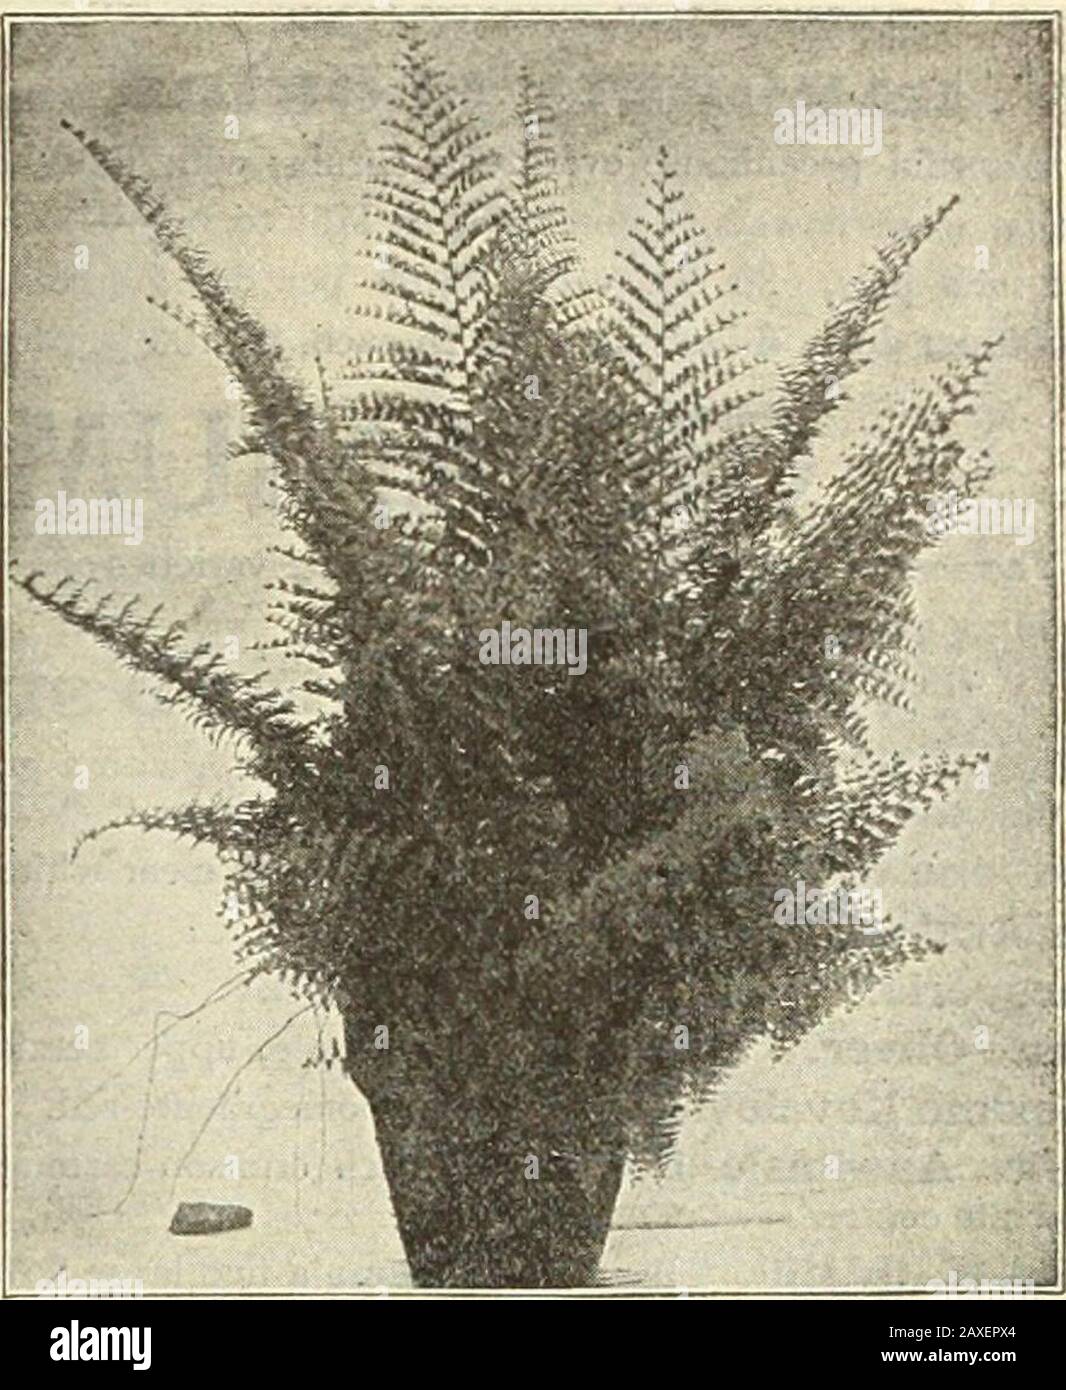 Dreer's garden book : seventy-fourth annual edition 1912 . ch frond, 15 cts.Adiantoides. 15 cts.Cretica Aibo-Lineata. A pretty variegated variety. 15 cts. — riagnlfica. Beautiful crested fronds. 15 cts. — MayiL A dwarf, variegated sort, prettily crested. 15 cts. Sieboldii. 15 cts.Tremula. 15 cts.Victoria. 15 cts.Wilsoni. 15 cts. and 25 cts.Wimsetti. 15 cts.— Multlceps. 15 cts. Hastata. 15 cts.Intemata. 15 cts.Leptophylla. 15 cts.Ouvrardi. 15 cts.Semilata. 15 cts.— Cristata. 15 cts. SITALOBIUM. Cicutarium. Good Fern for the amateur. 15 cts. COI.I.ECTIONS OF FERNS. One each of the 22 Adiantums, Stock Photo